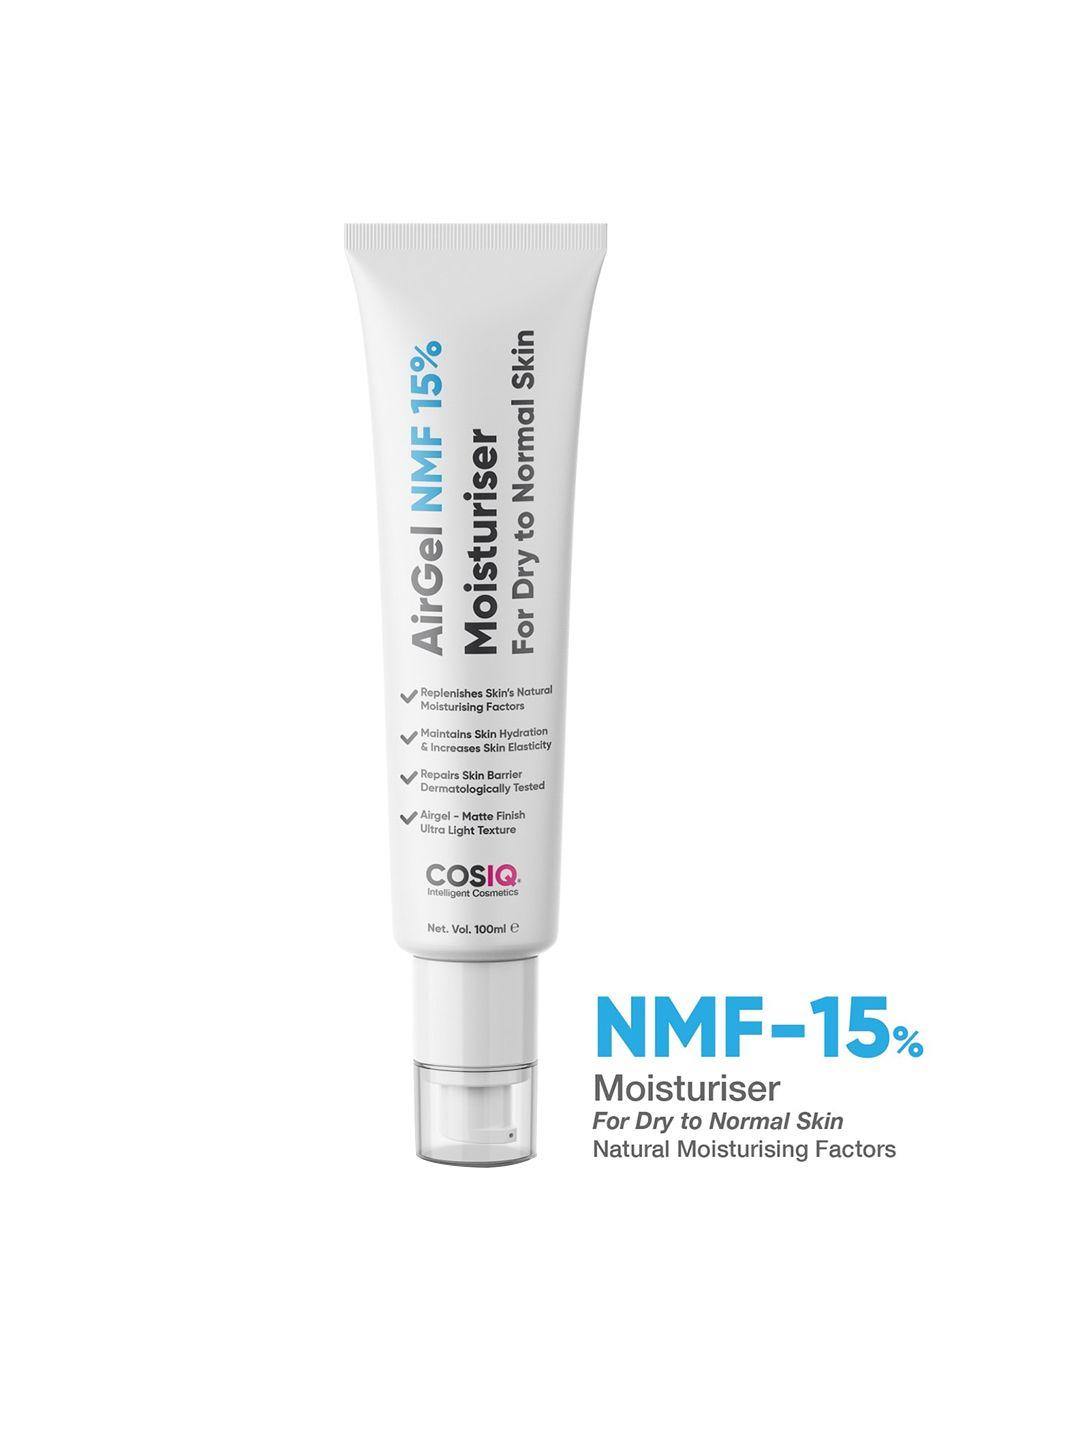 cosiq airgel nmf 15% face moisturizer with hyaluronic acid - 100 ml